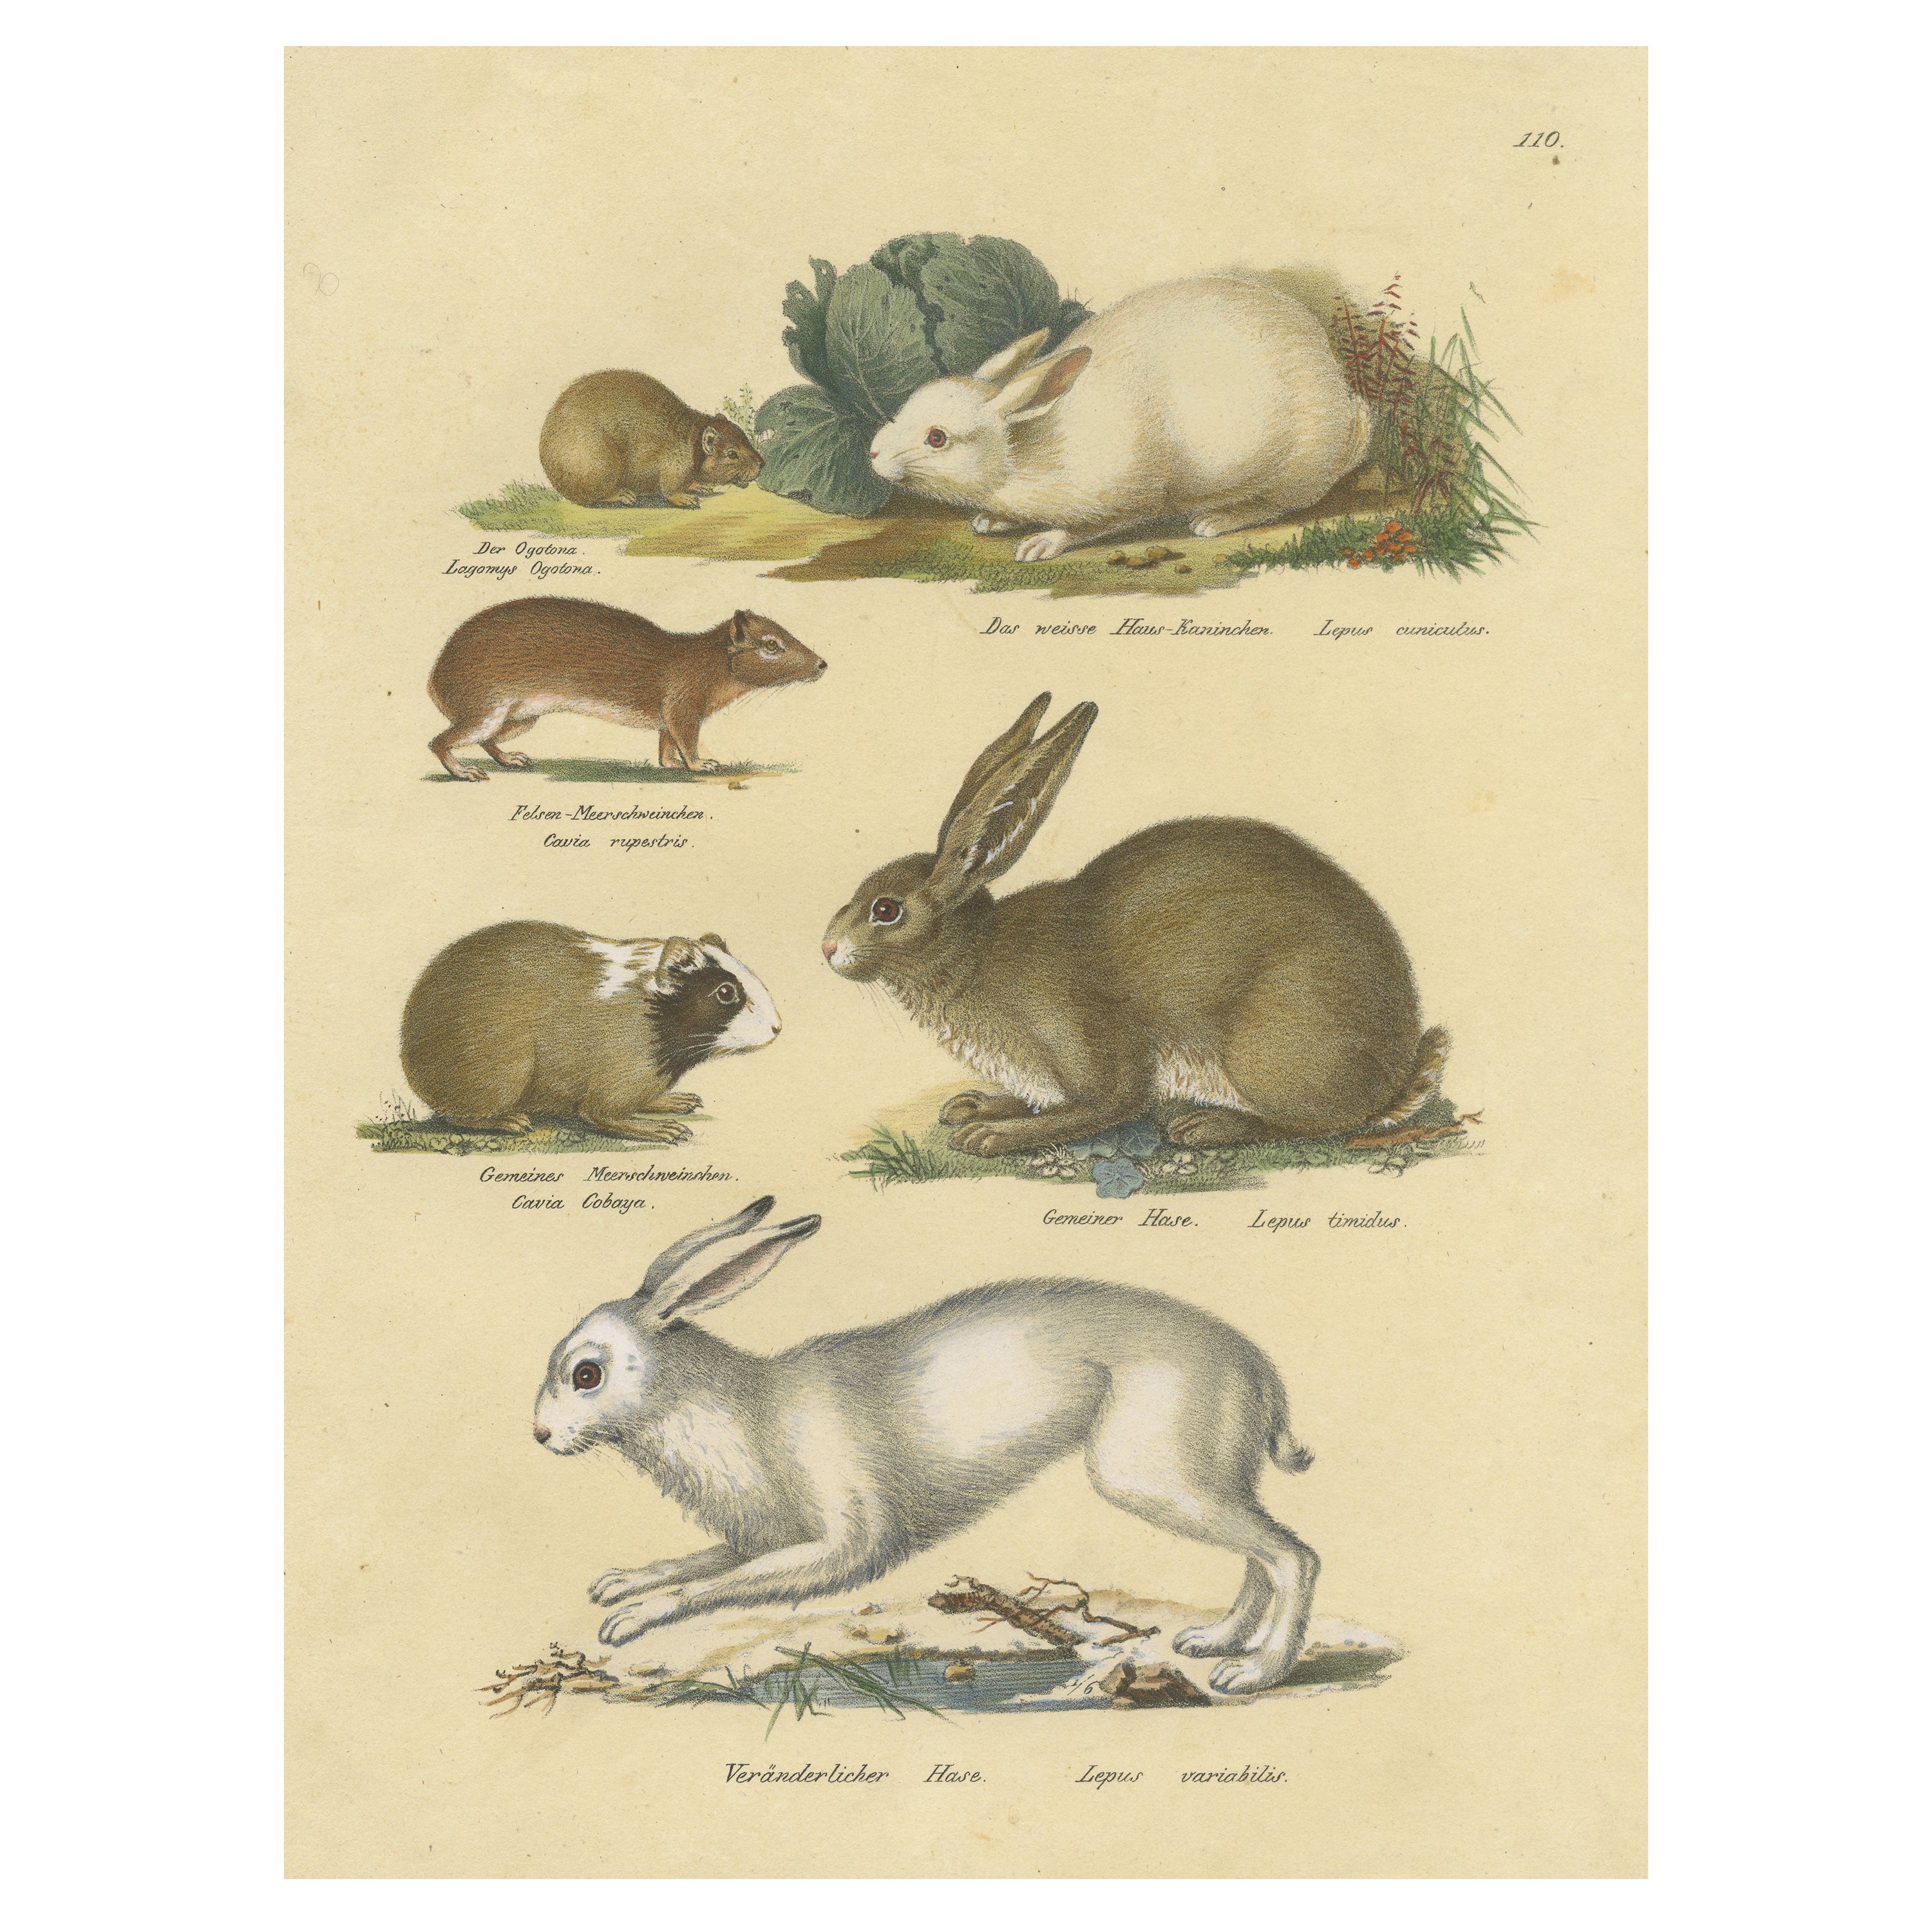 Antique Hand Colored Print of a Rabbit, Hares, Pika and Other Rodents